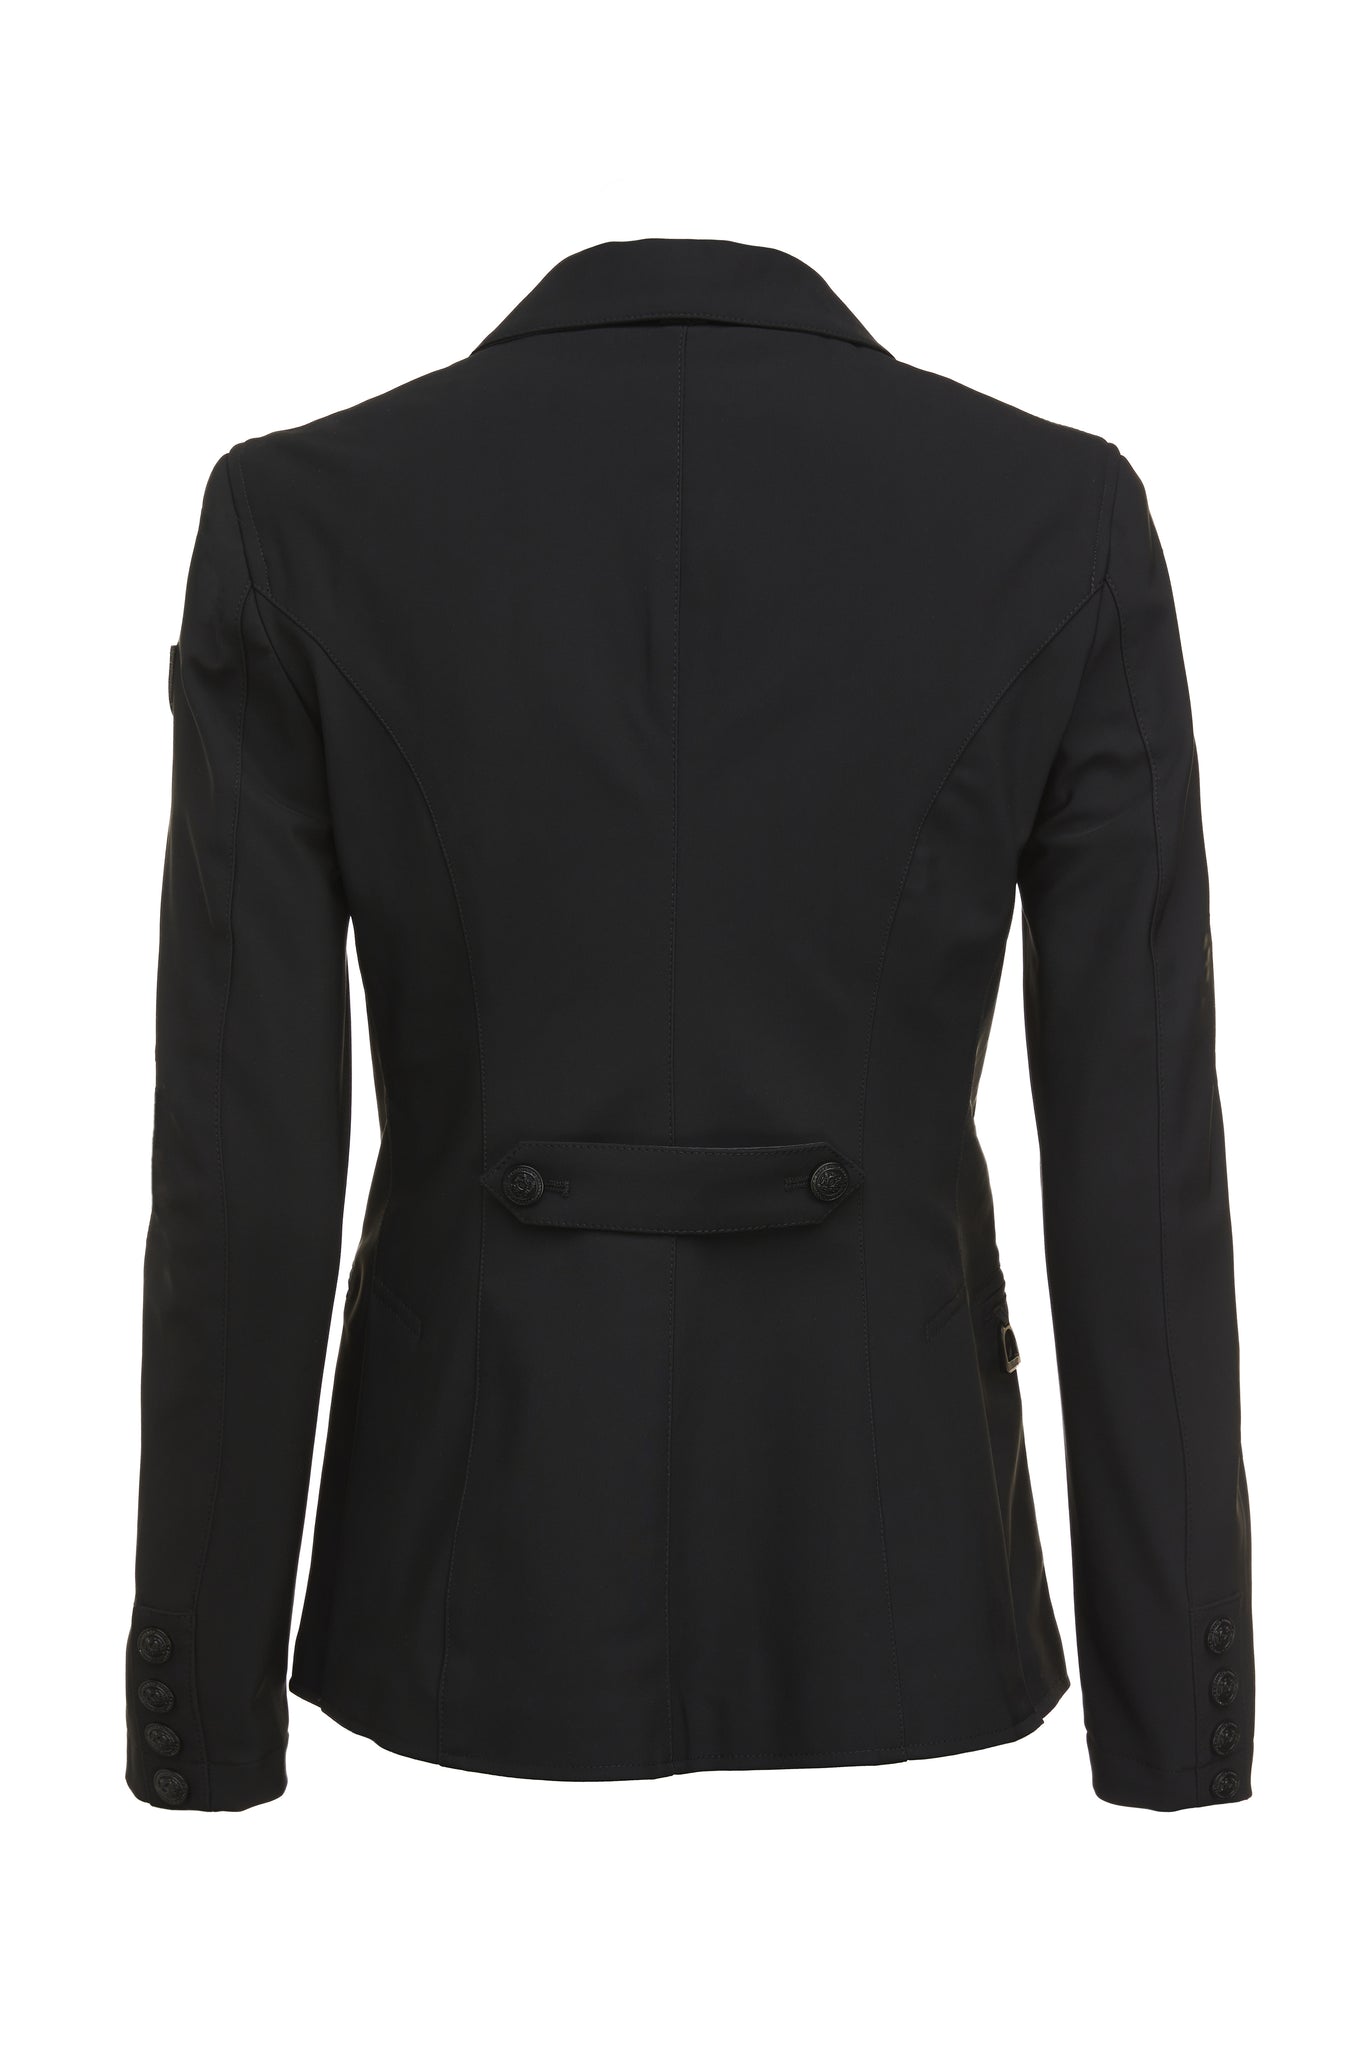 back of womens black competition jacket with black hardware